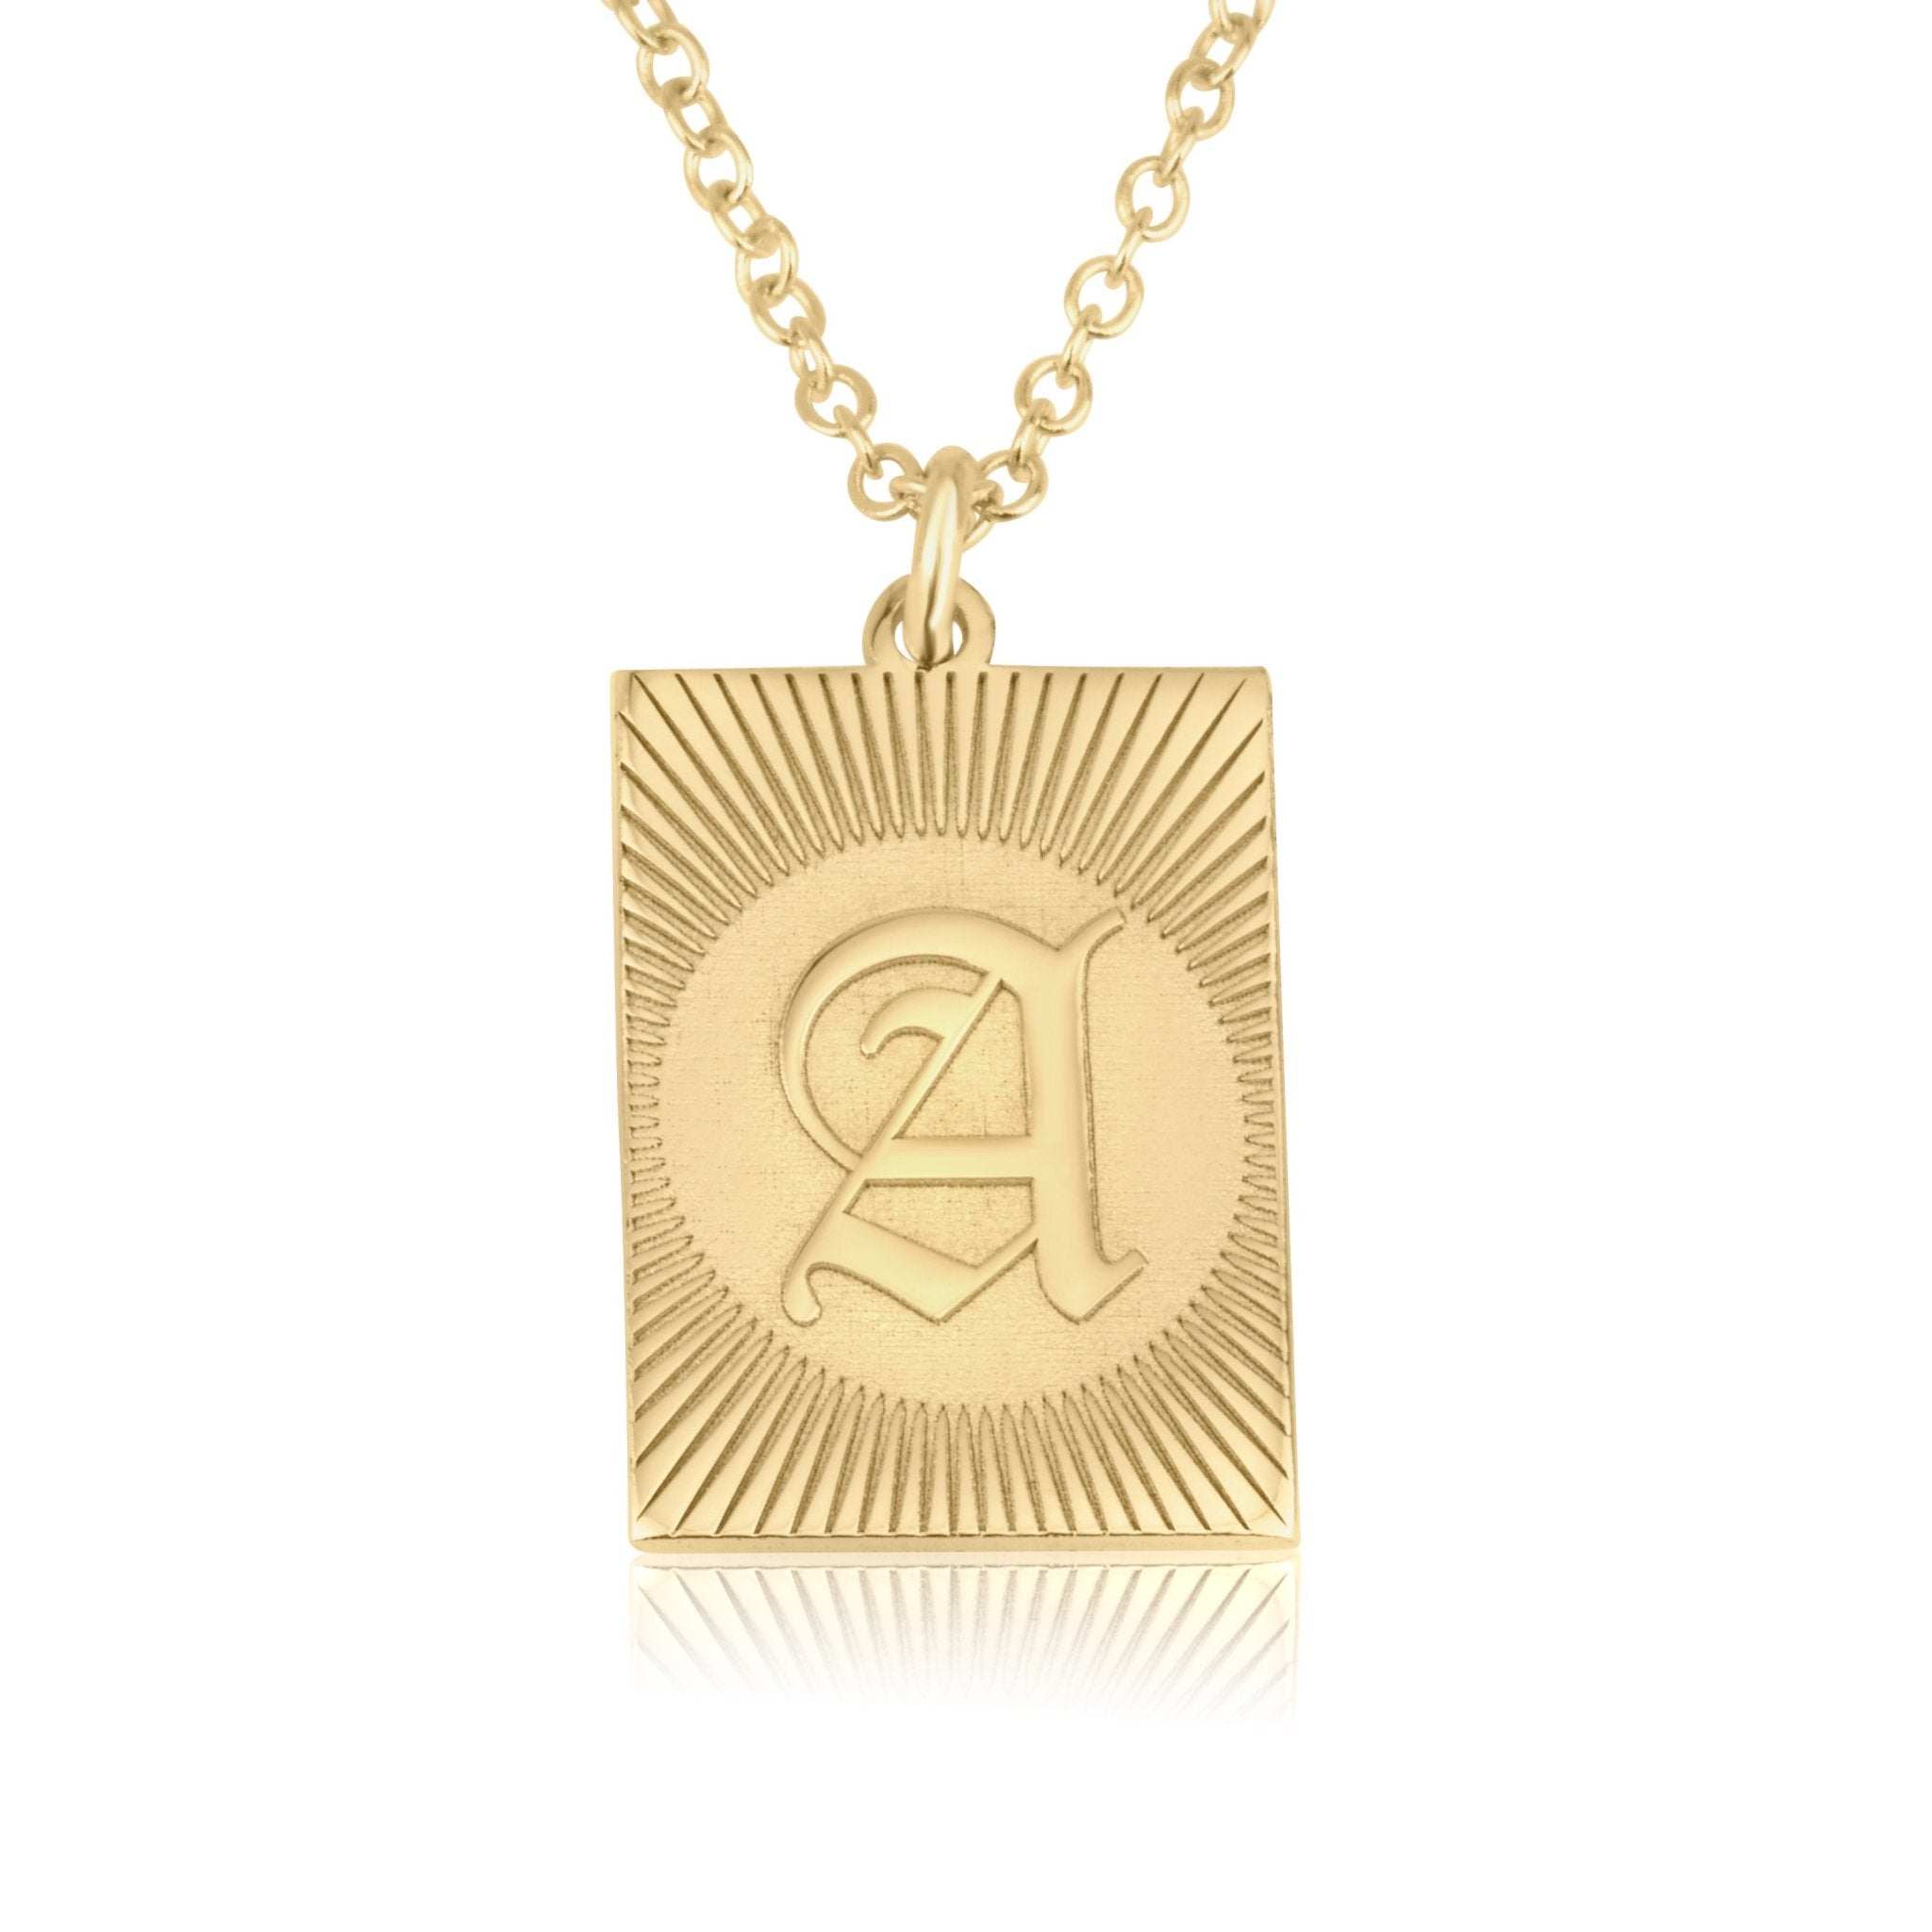 Men's Initial Necklace - Engraved Initial Chain For Men